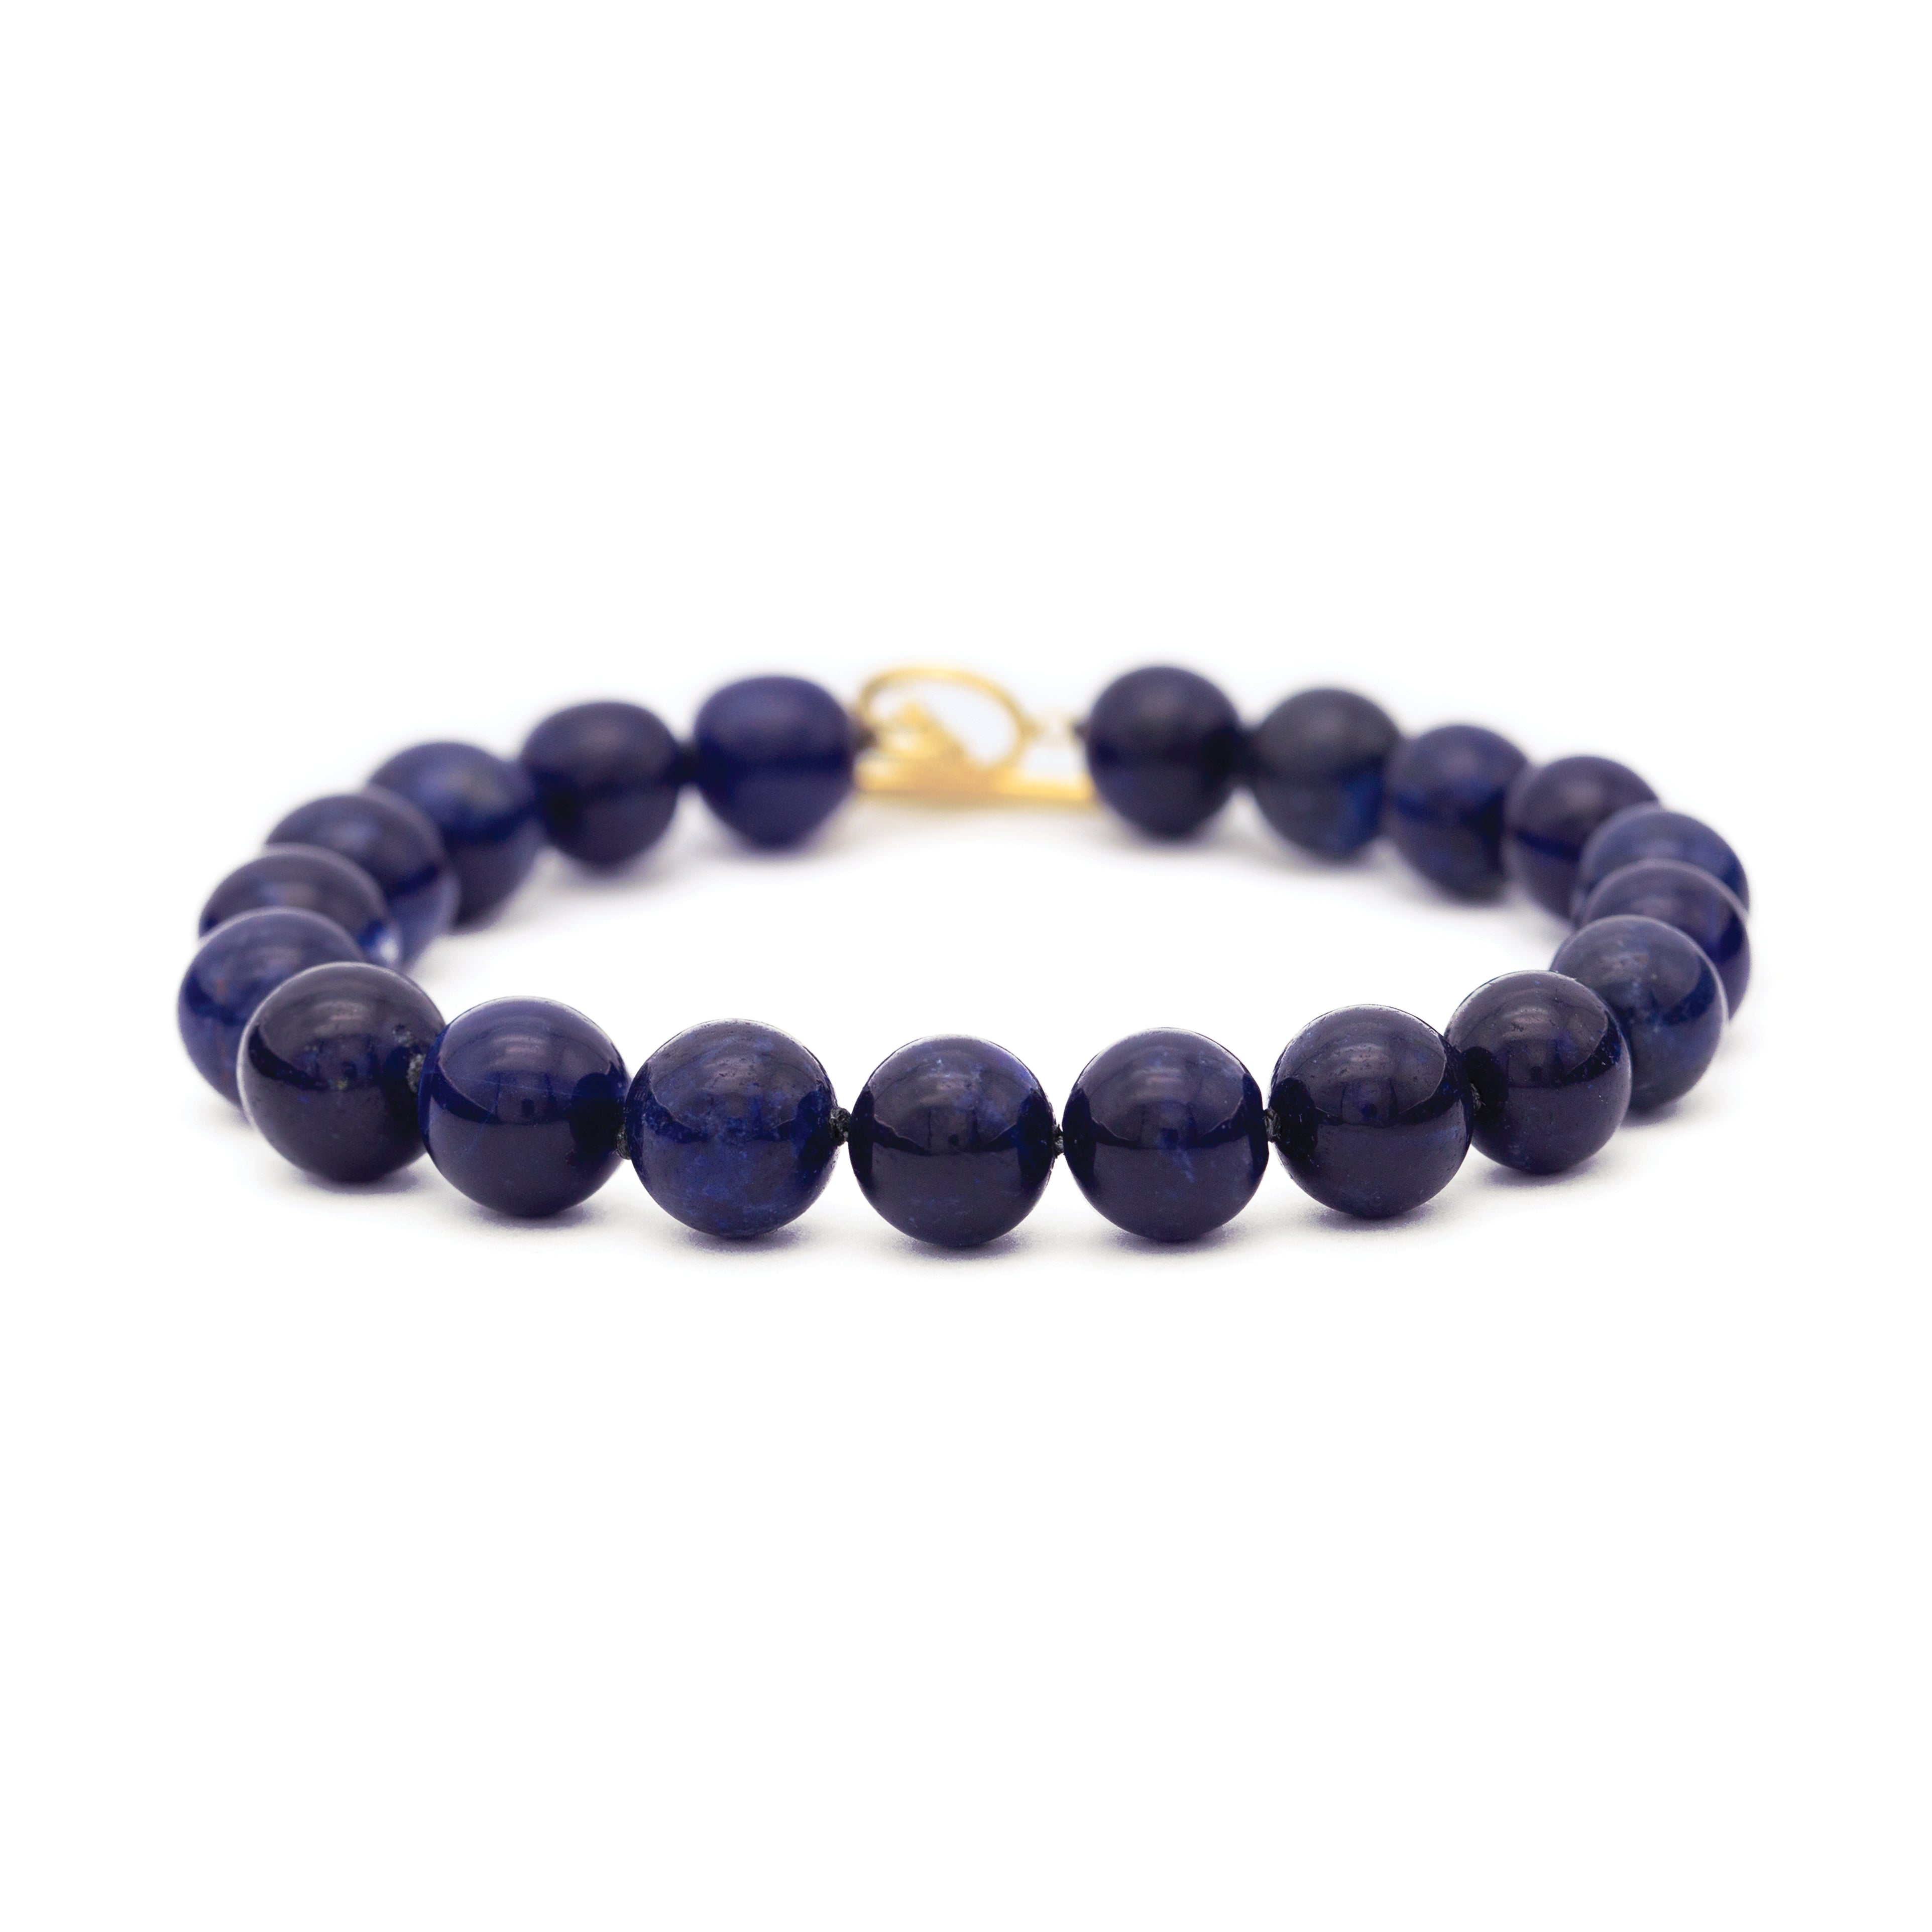 Crystal healing Indigo bracelet known for developing and clarifying your intuition